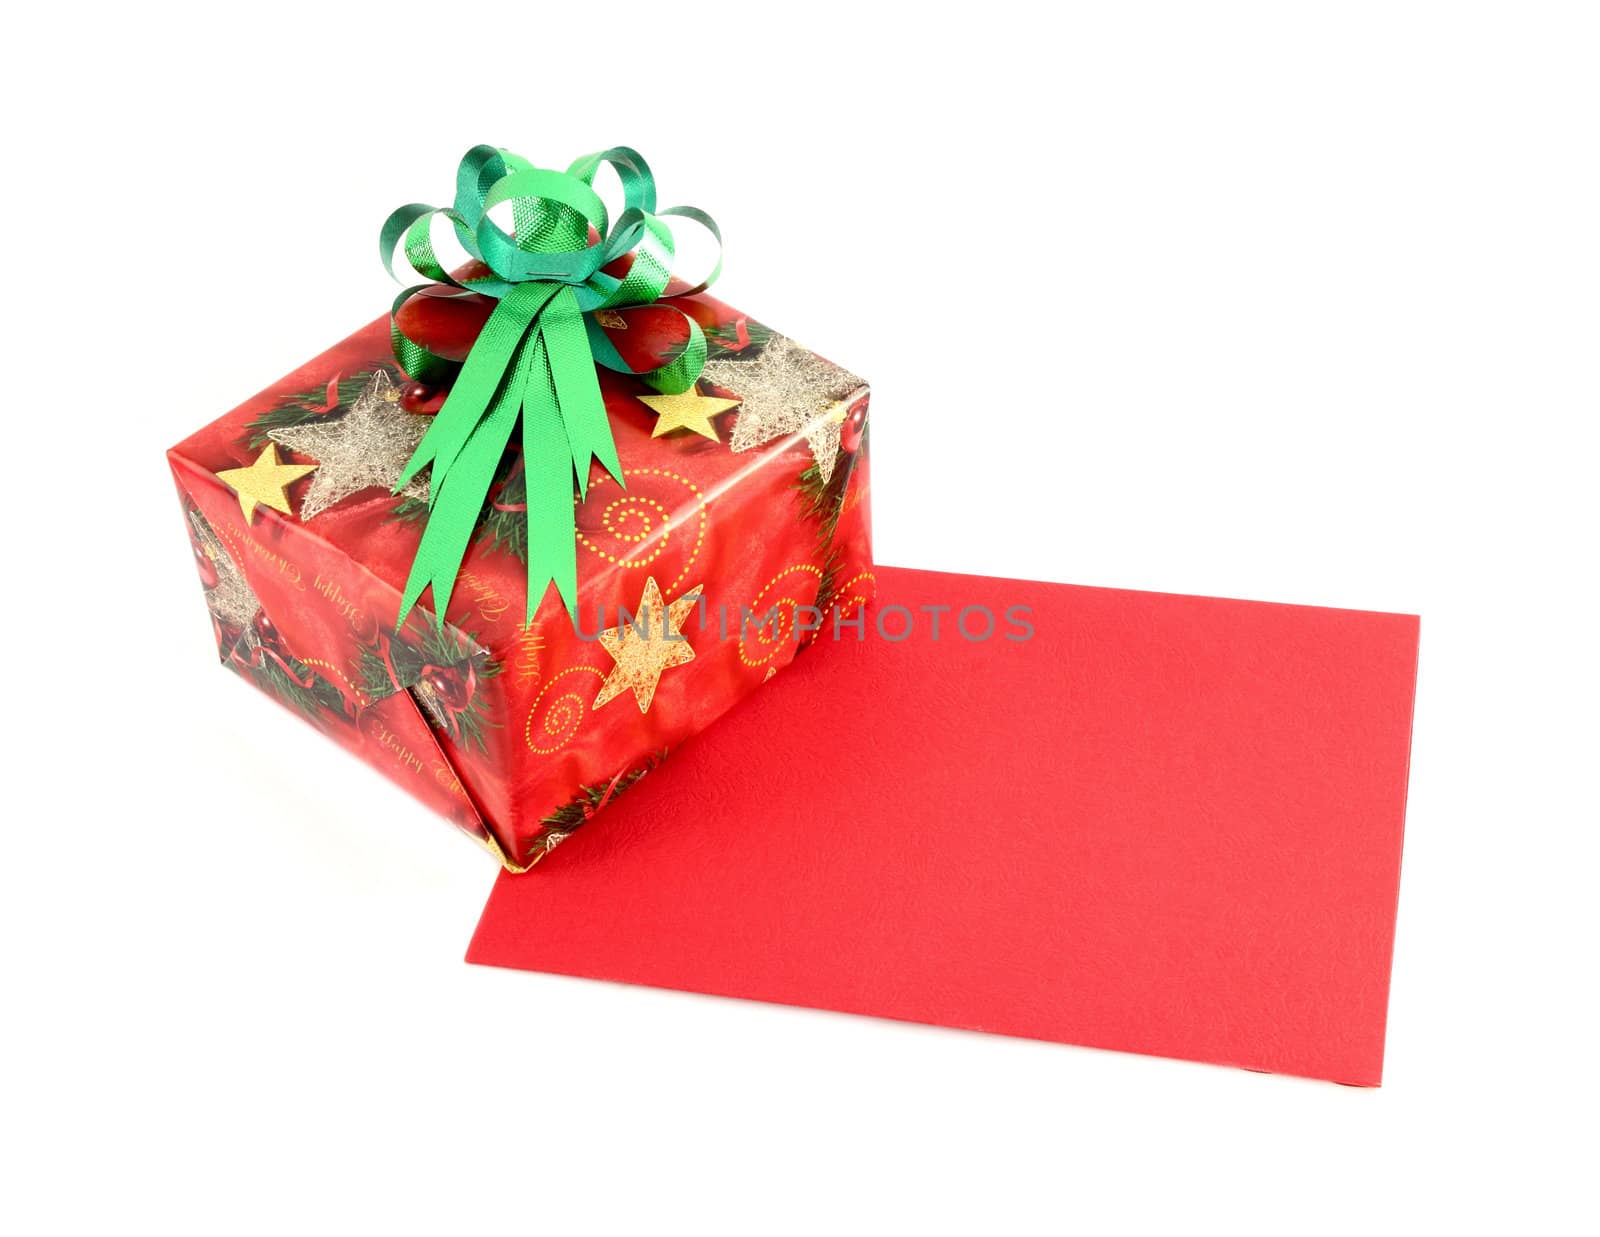 gift box and gift card with ribbon bow on white background